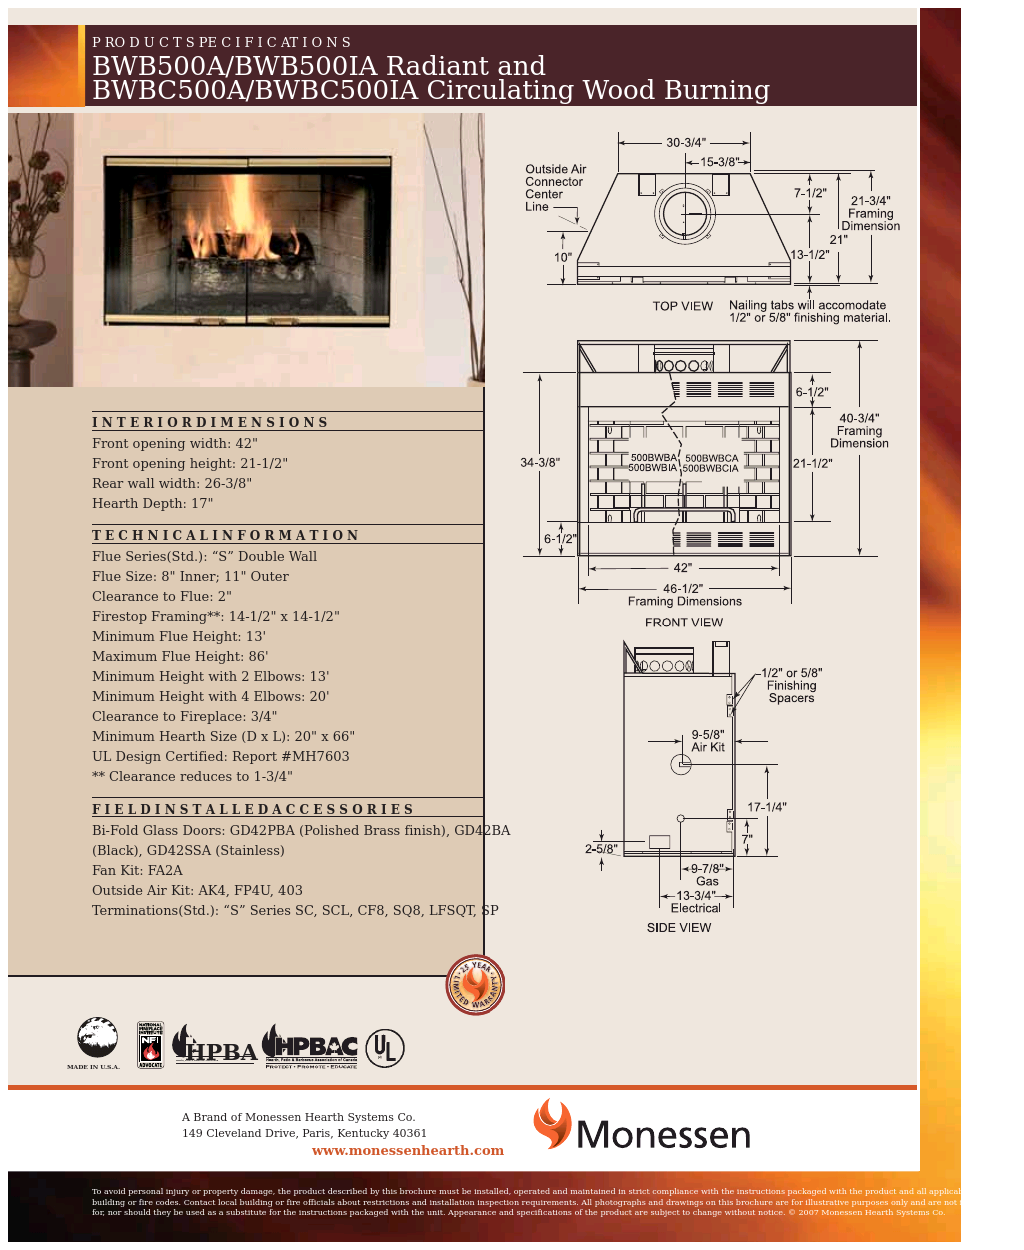 36" and 42" Wood Burning Fireplaces BWBC500A